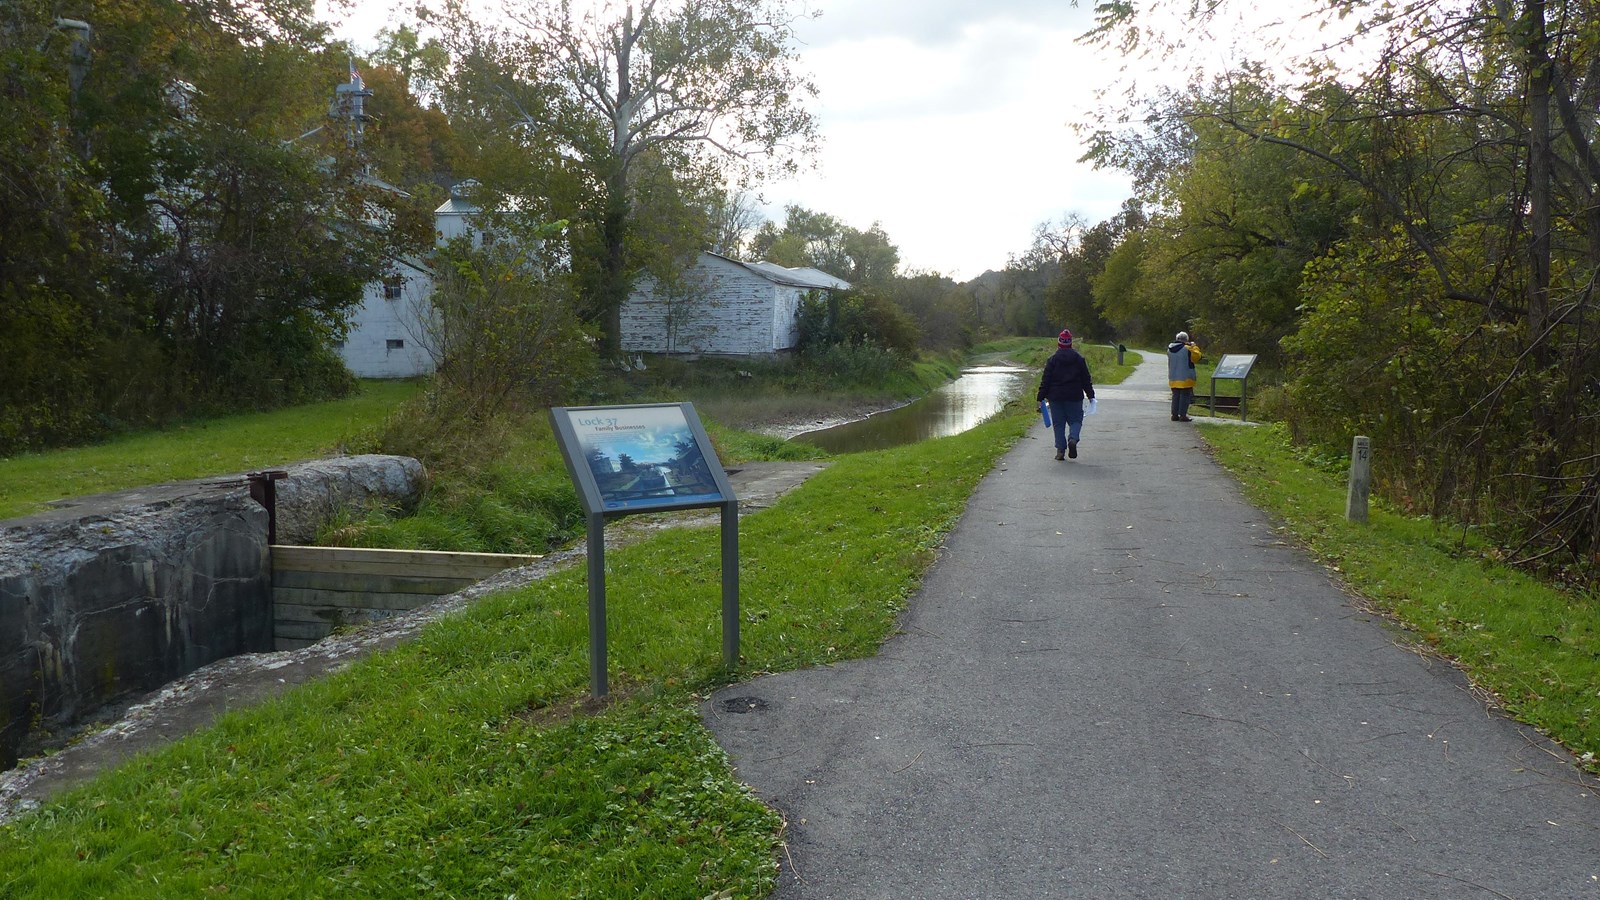 Two people walk a paved trail, pausing to read graphic panels. On the left is a water-filled canal w